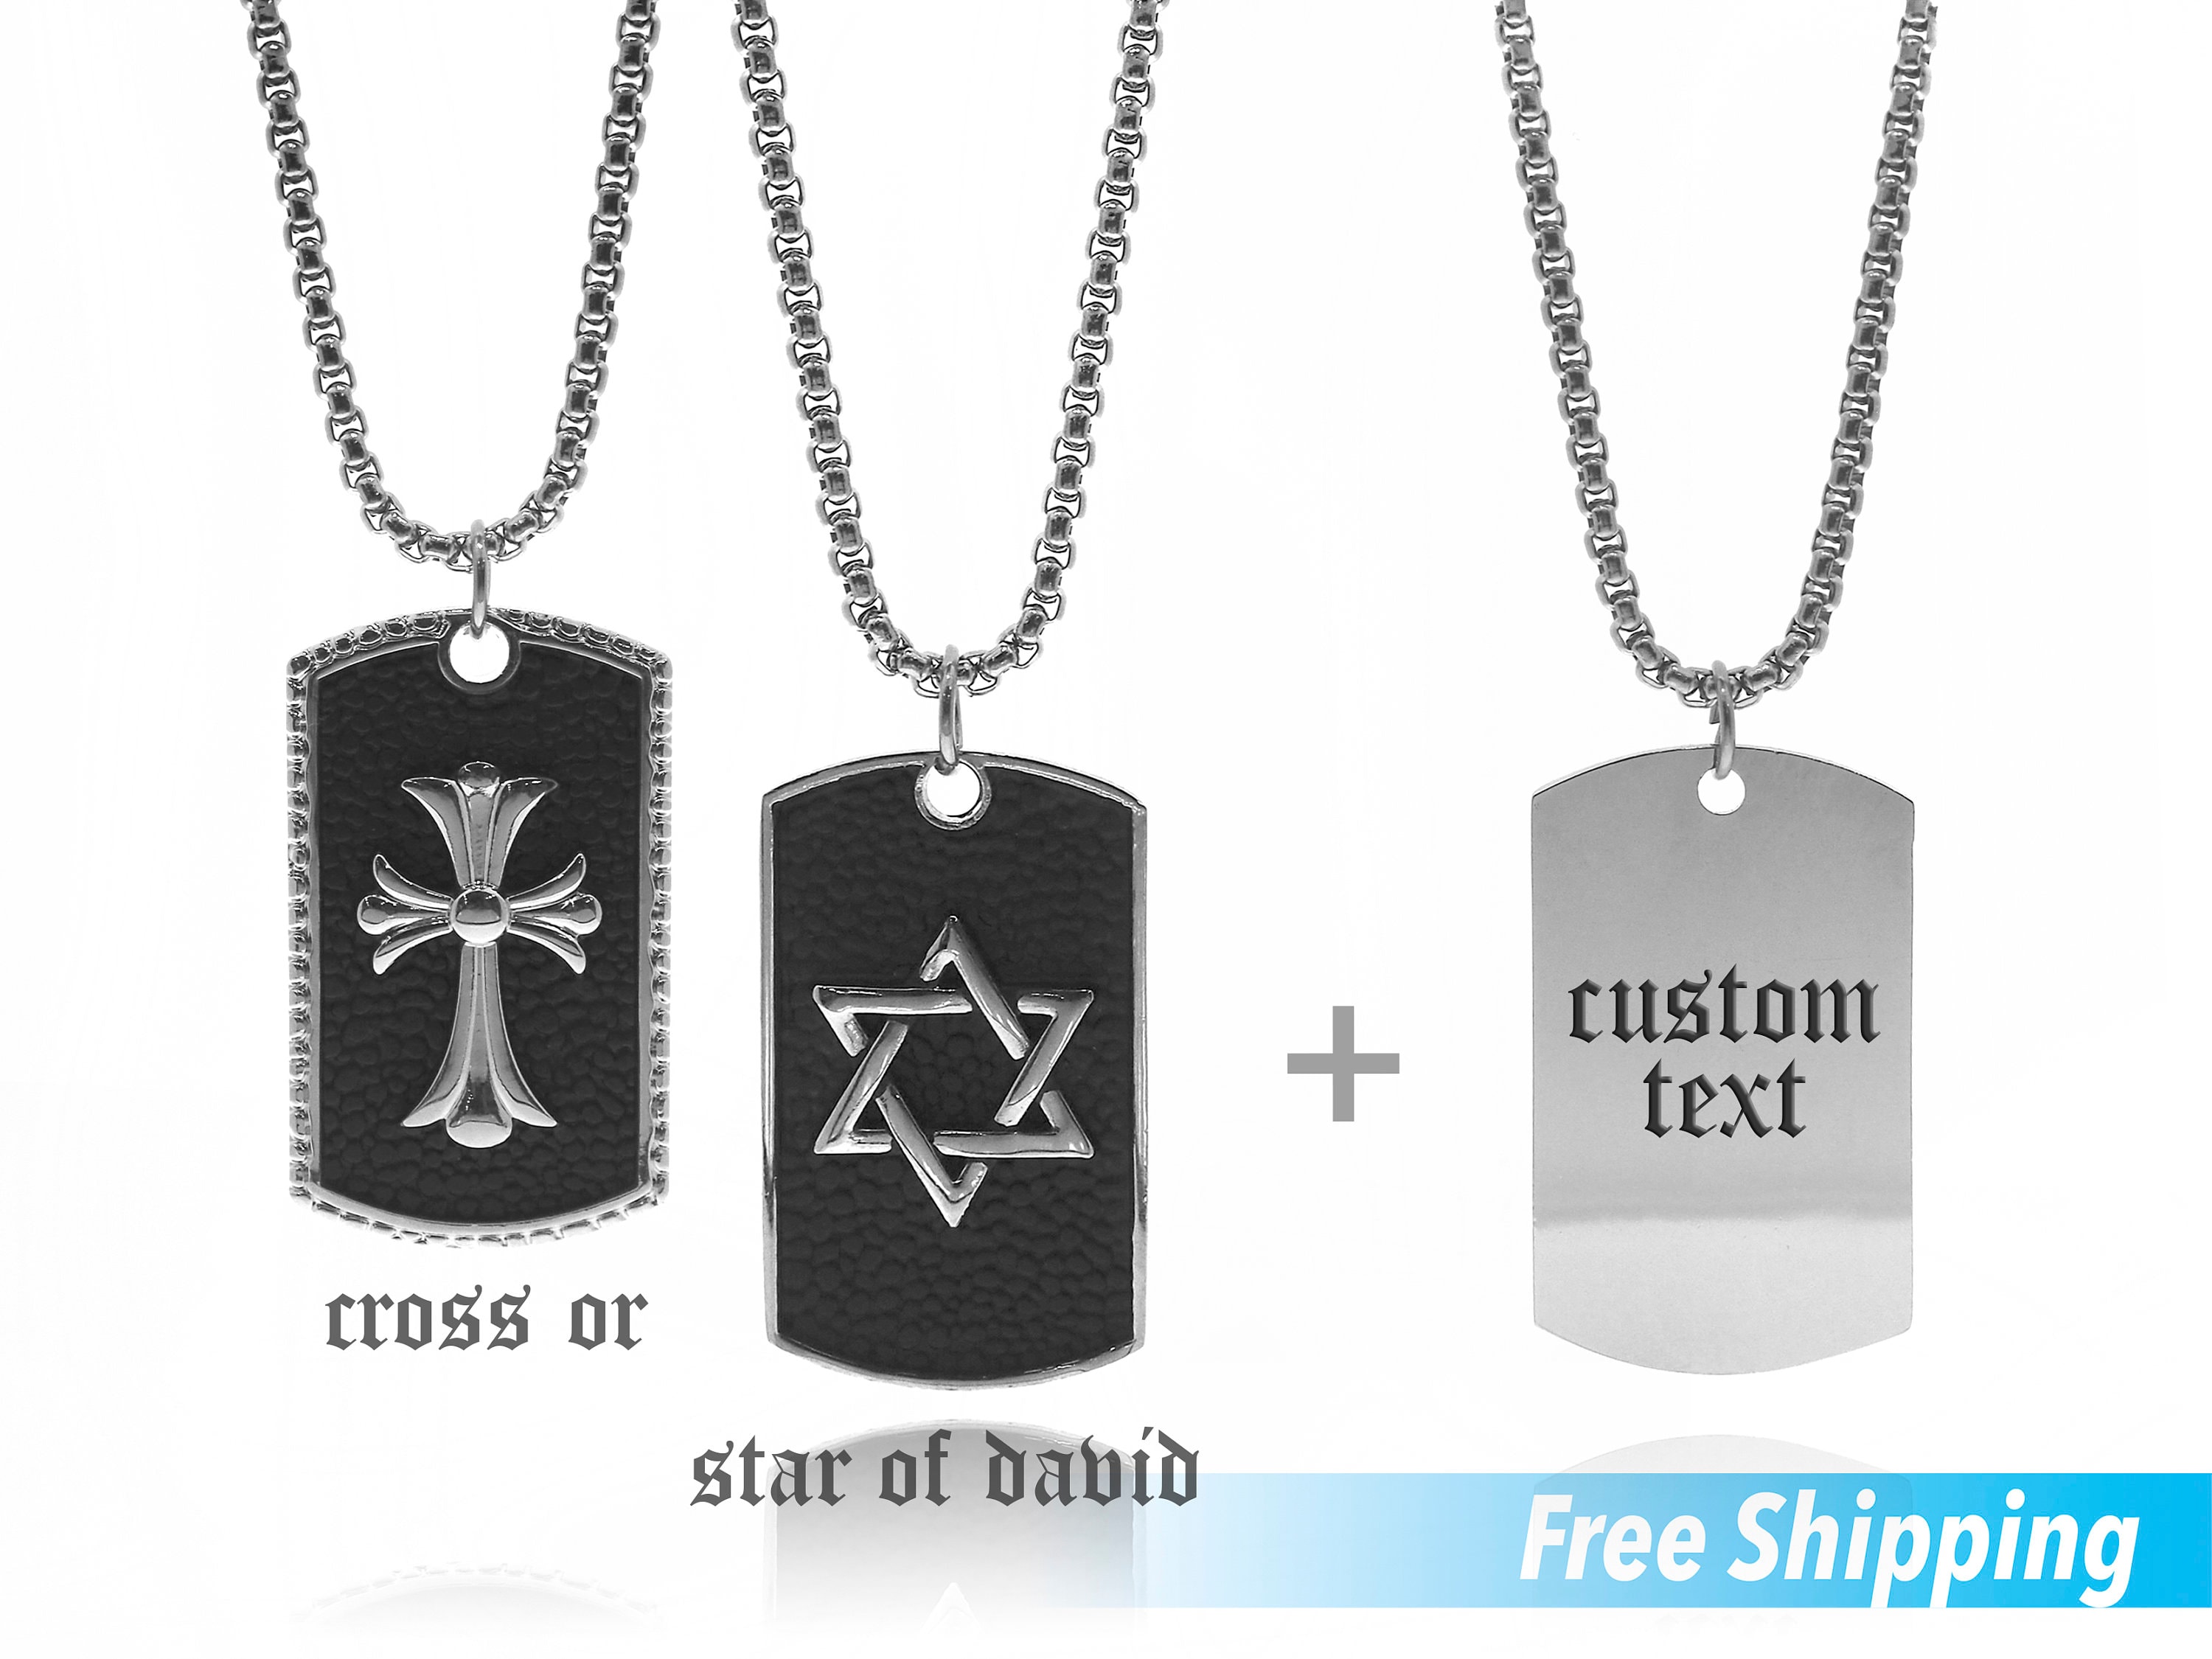 Tradition Hebrew Necklace, Shema Israel Pendant, Dog Tags for Men, Jewish  Jewelry, Verses Torah,army Necklace,silver Star of David Necklace 